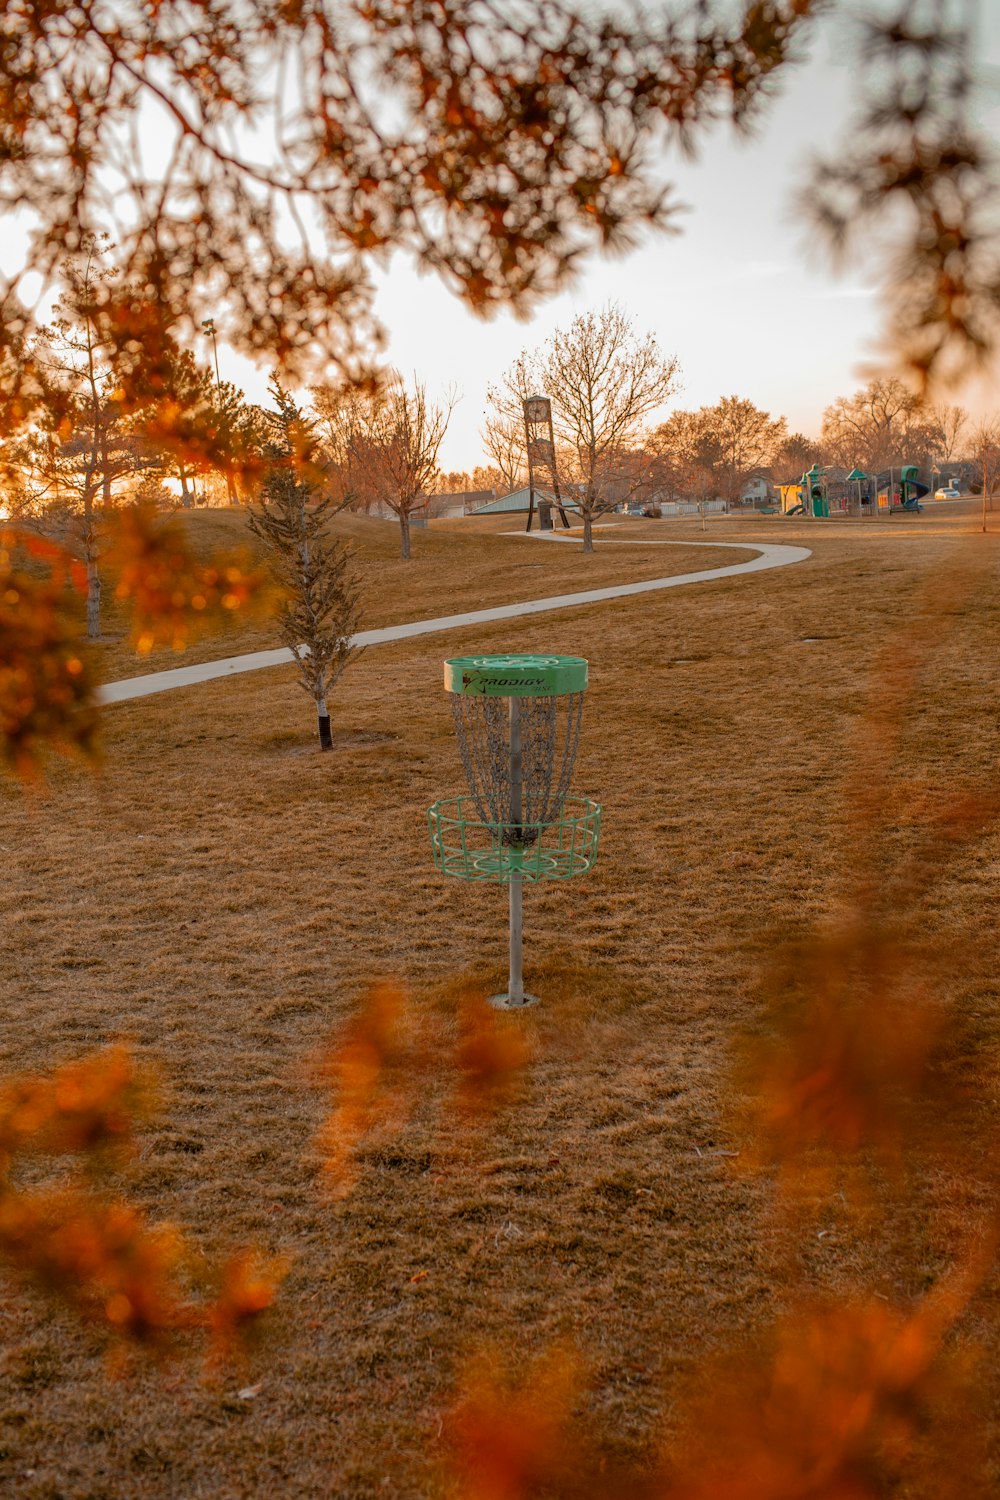 a frisbee golf goal in a park with a tree in the background